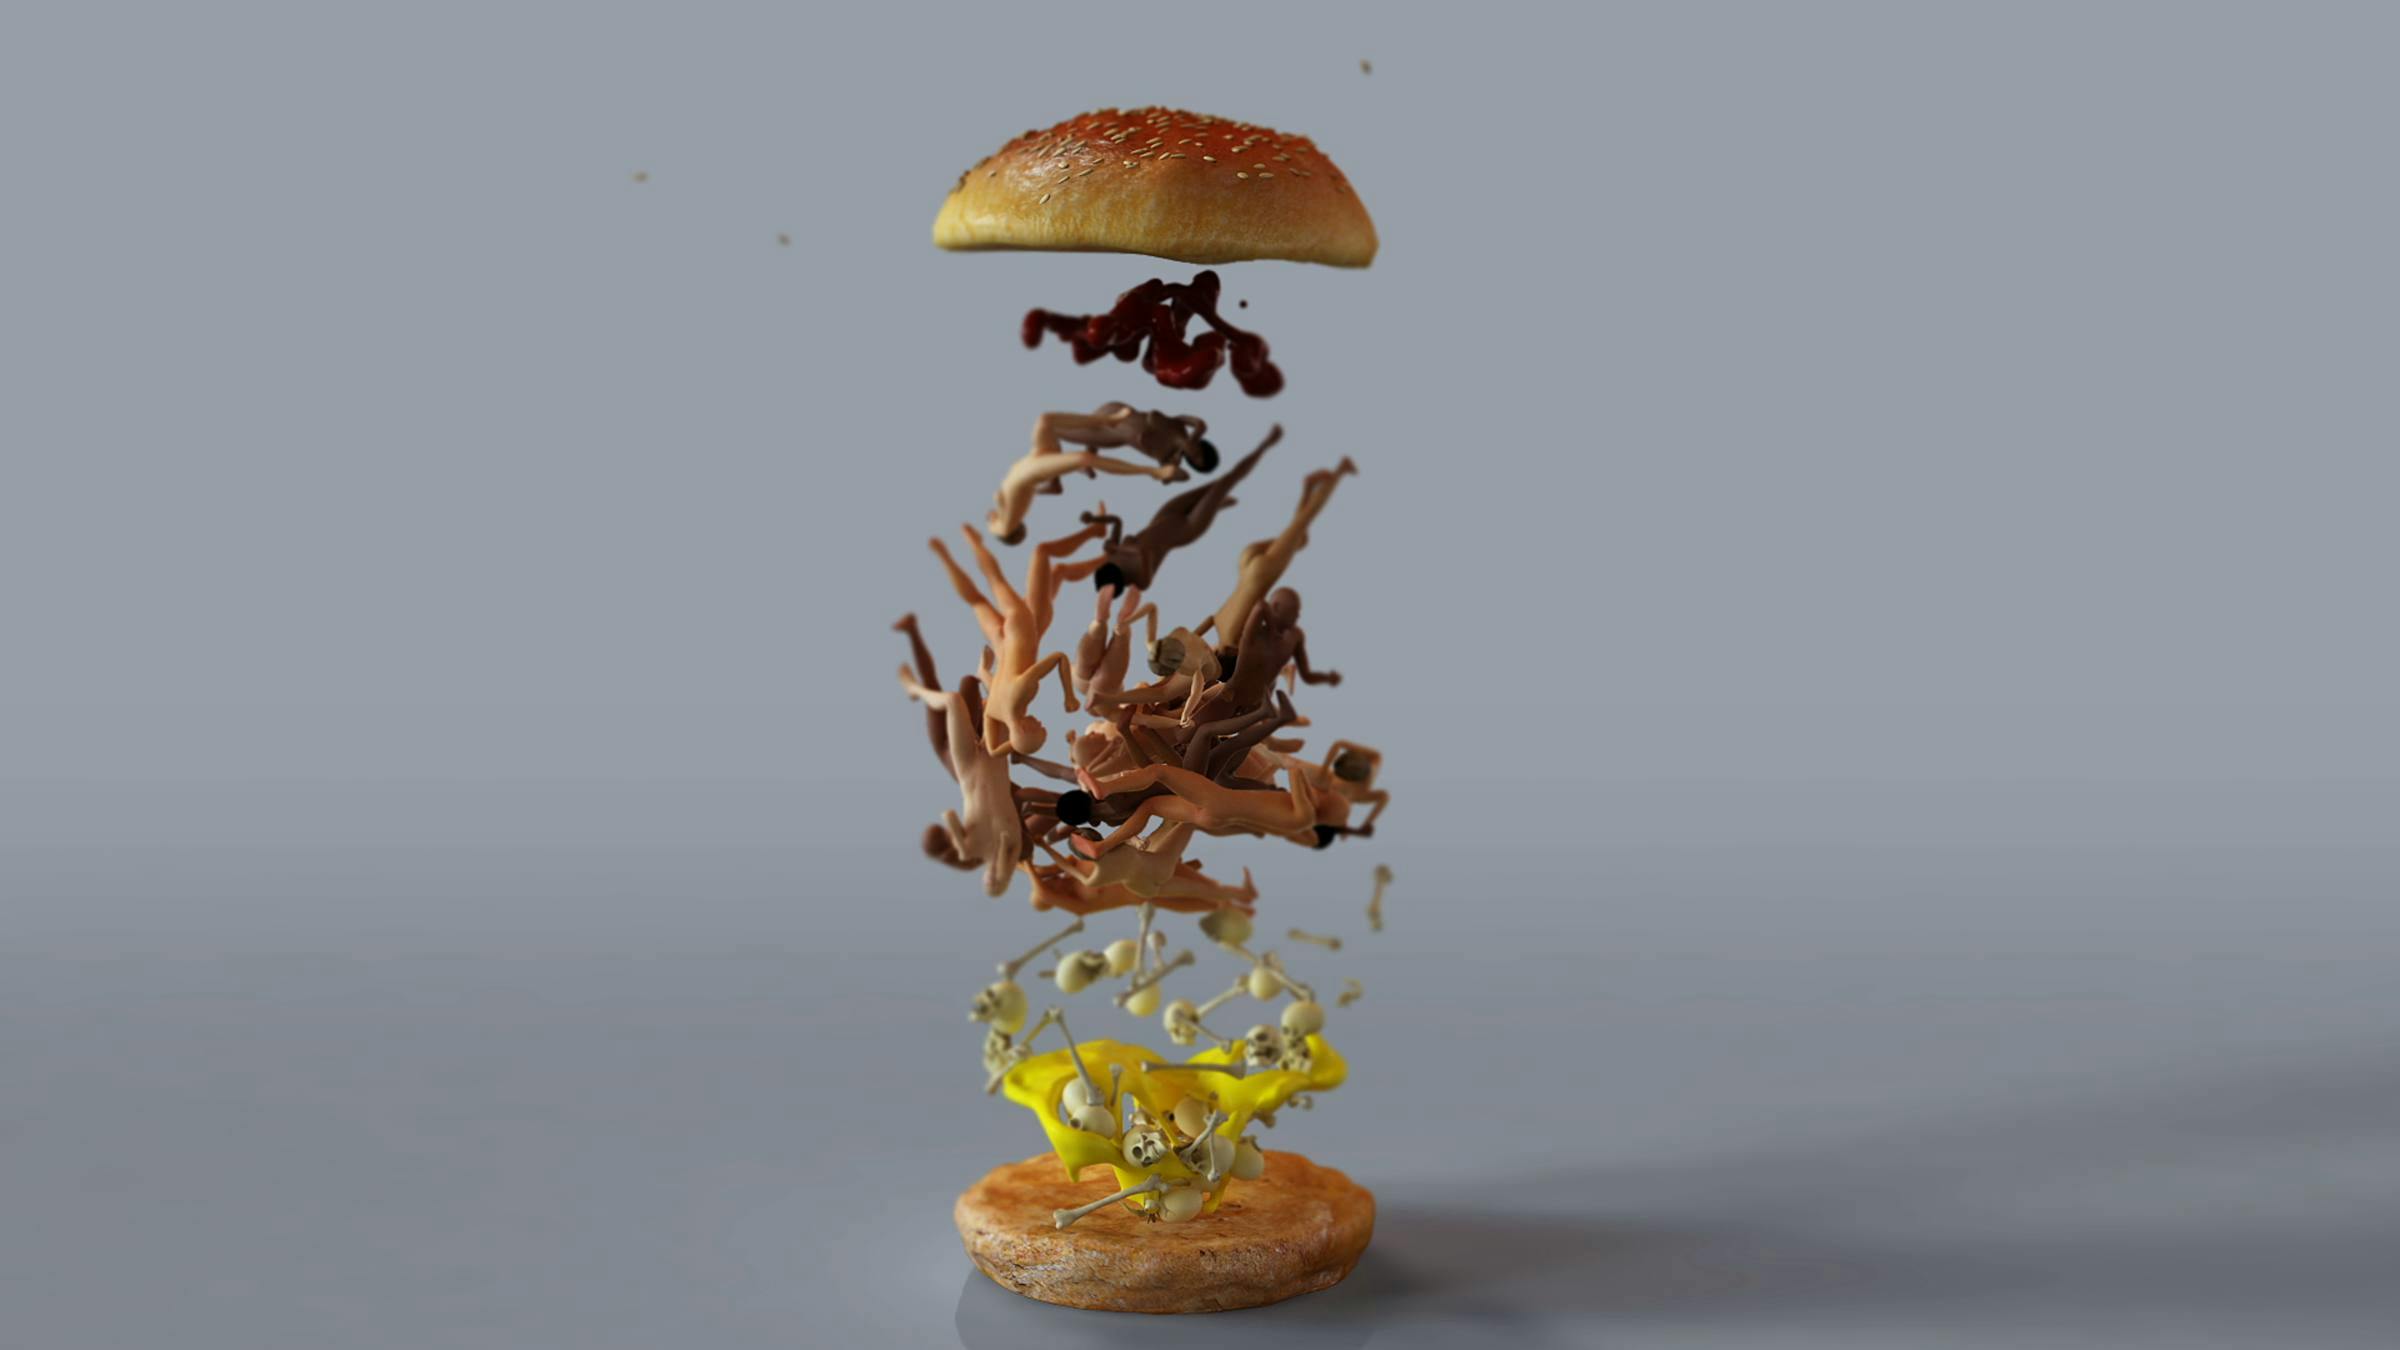 a digitally rendered image of an exploded view of a hamburger where the meat is made of human figures and bones